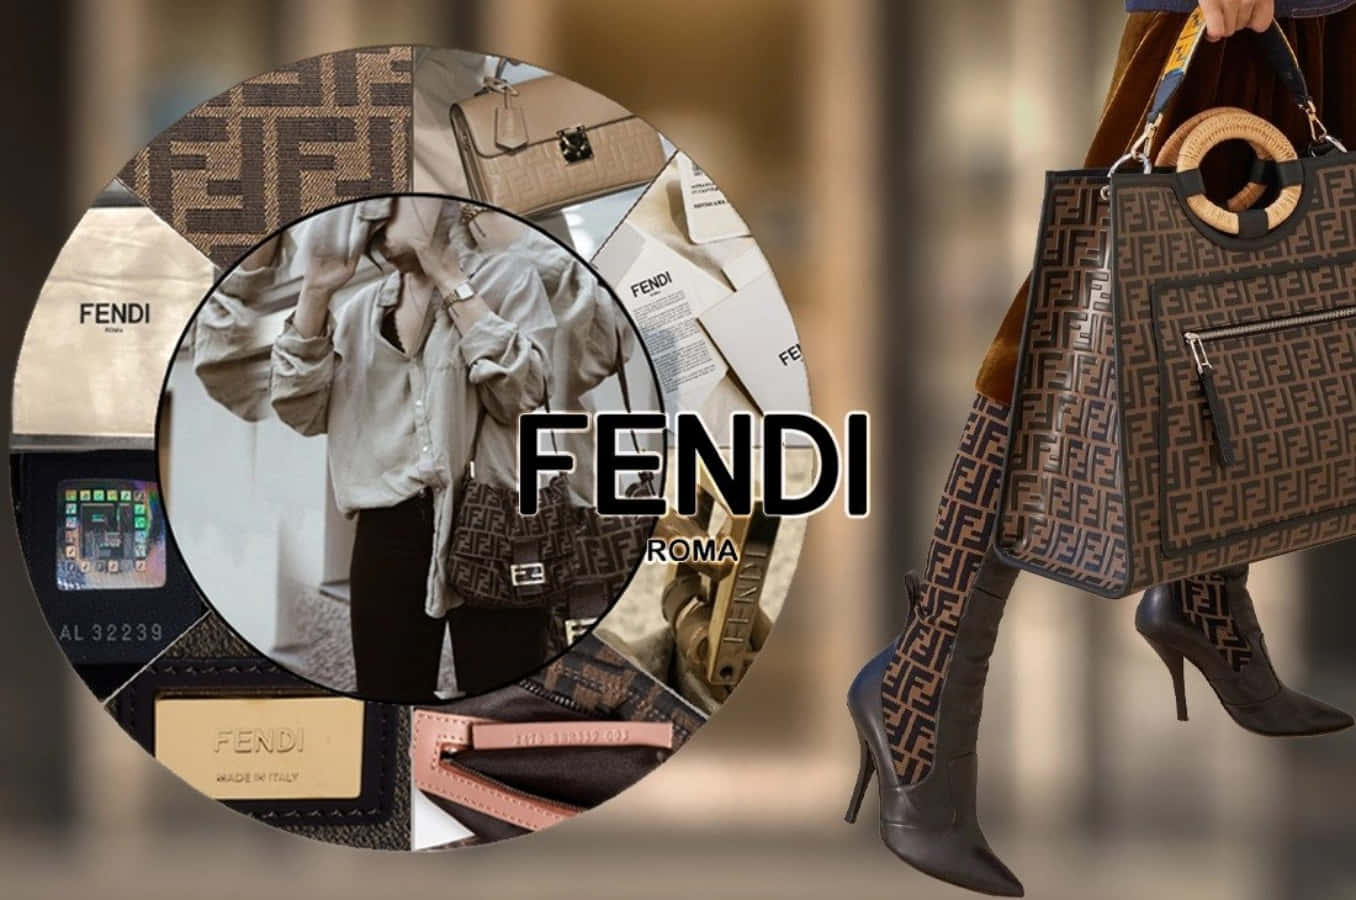 Shop Fendi's latest clothing and accessories and complete your wardrobe with unique Italian style.